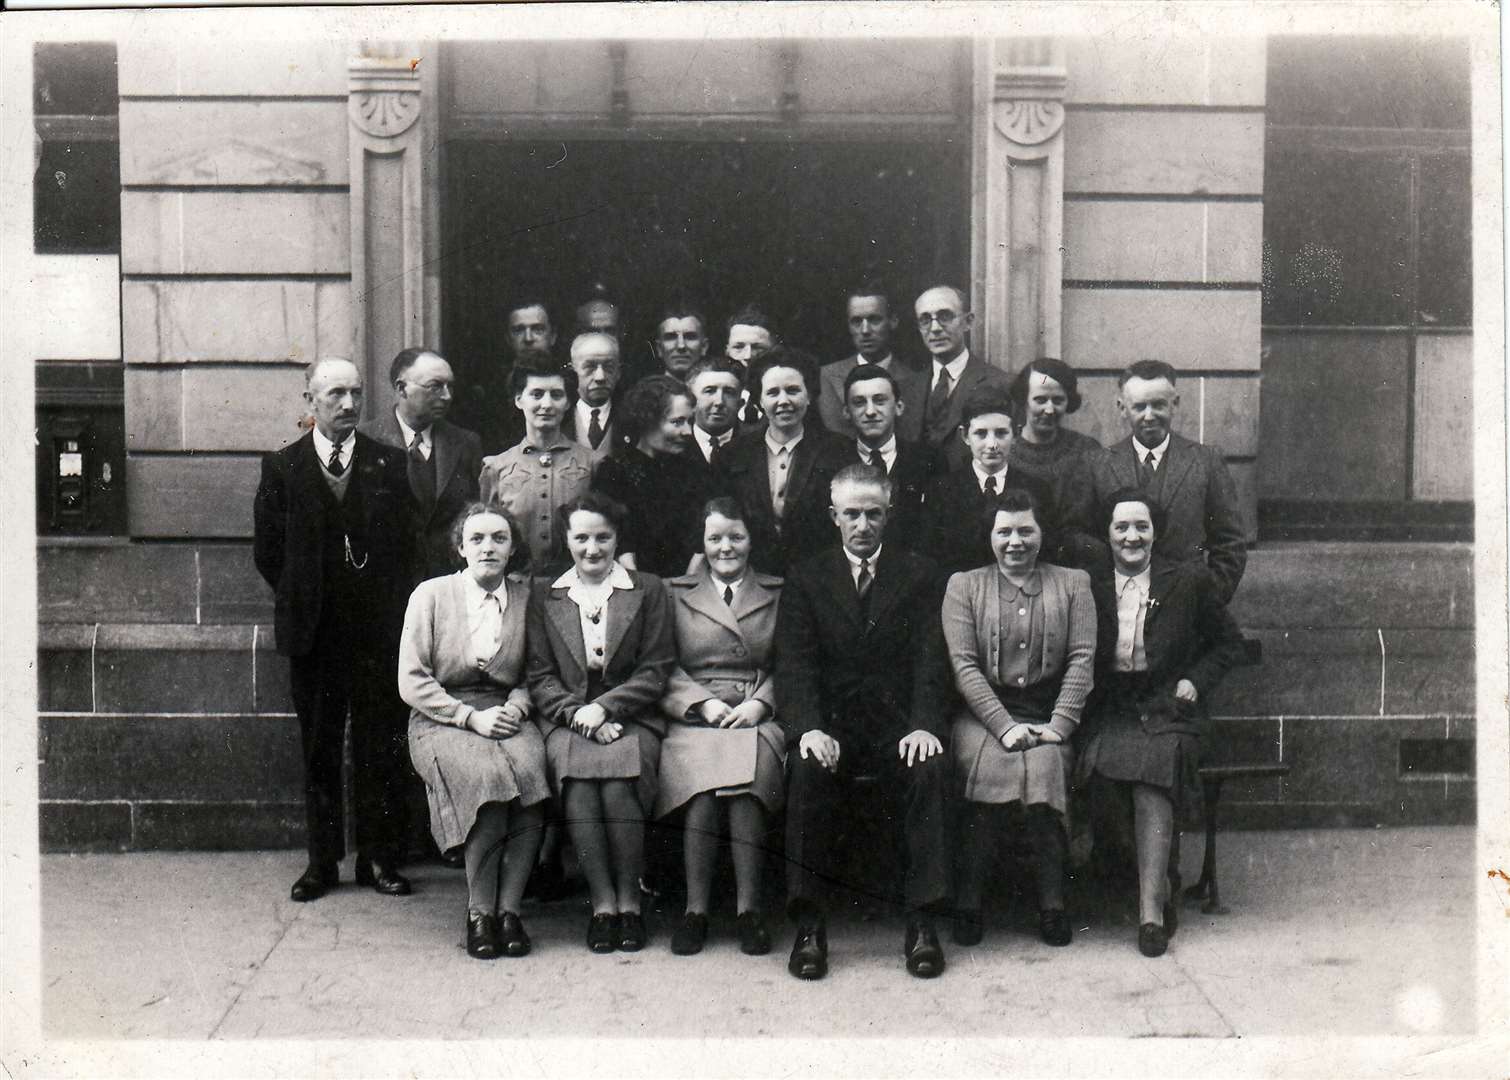 The photo, Elizabeth McMillan recalls,was taken in the late '40s. Amongst those pictured at a presentation event were (rear) J Macmillan, Alex Ross, Beatrice Shand, Peggy Patience, Alex Skinner, Morag Cattanach, Hugh Grant; (front) Margaret Fox, Elizabeth McMillan, Enid Tree, Mr Soutar, Cathana Ross, Lizzie Anderson.